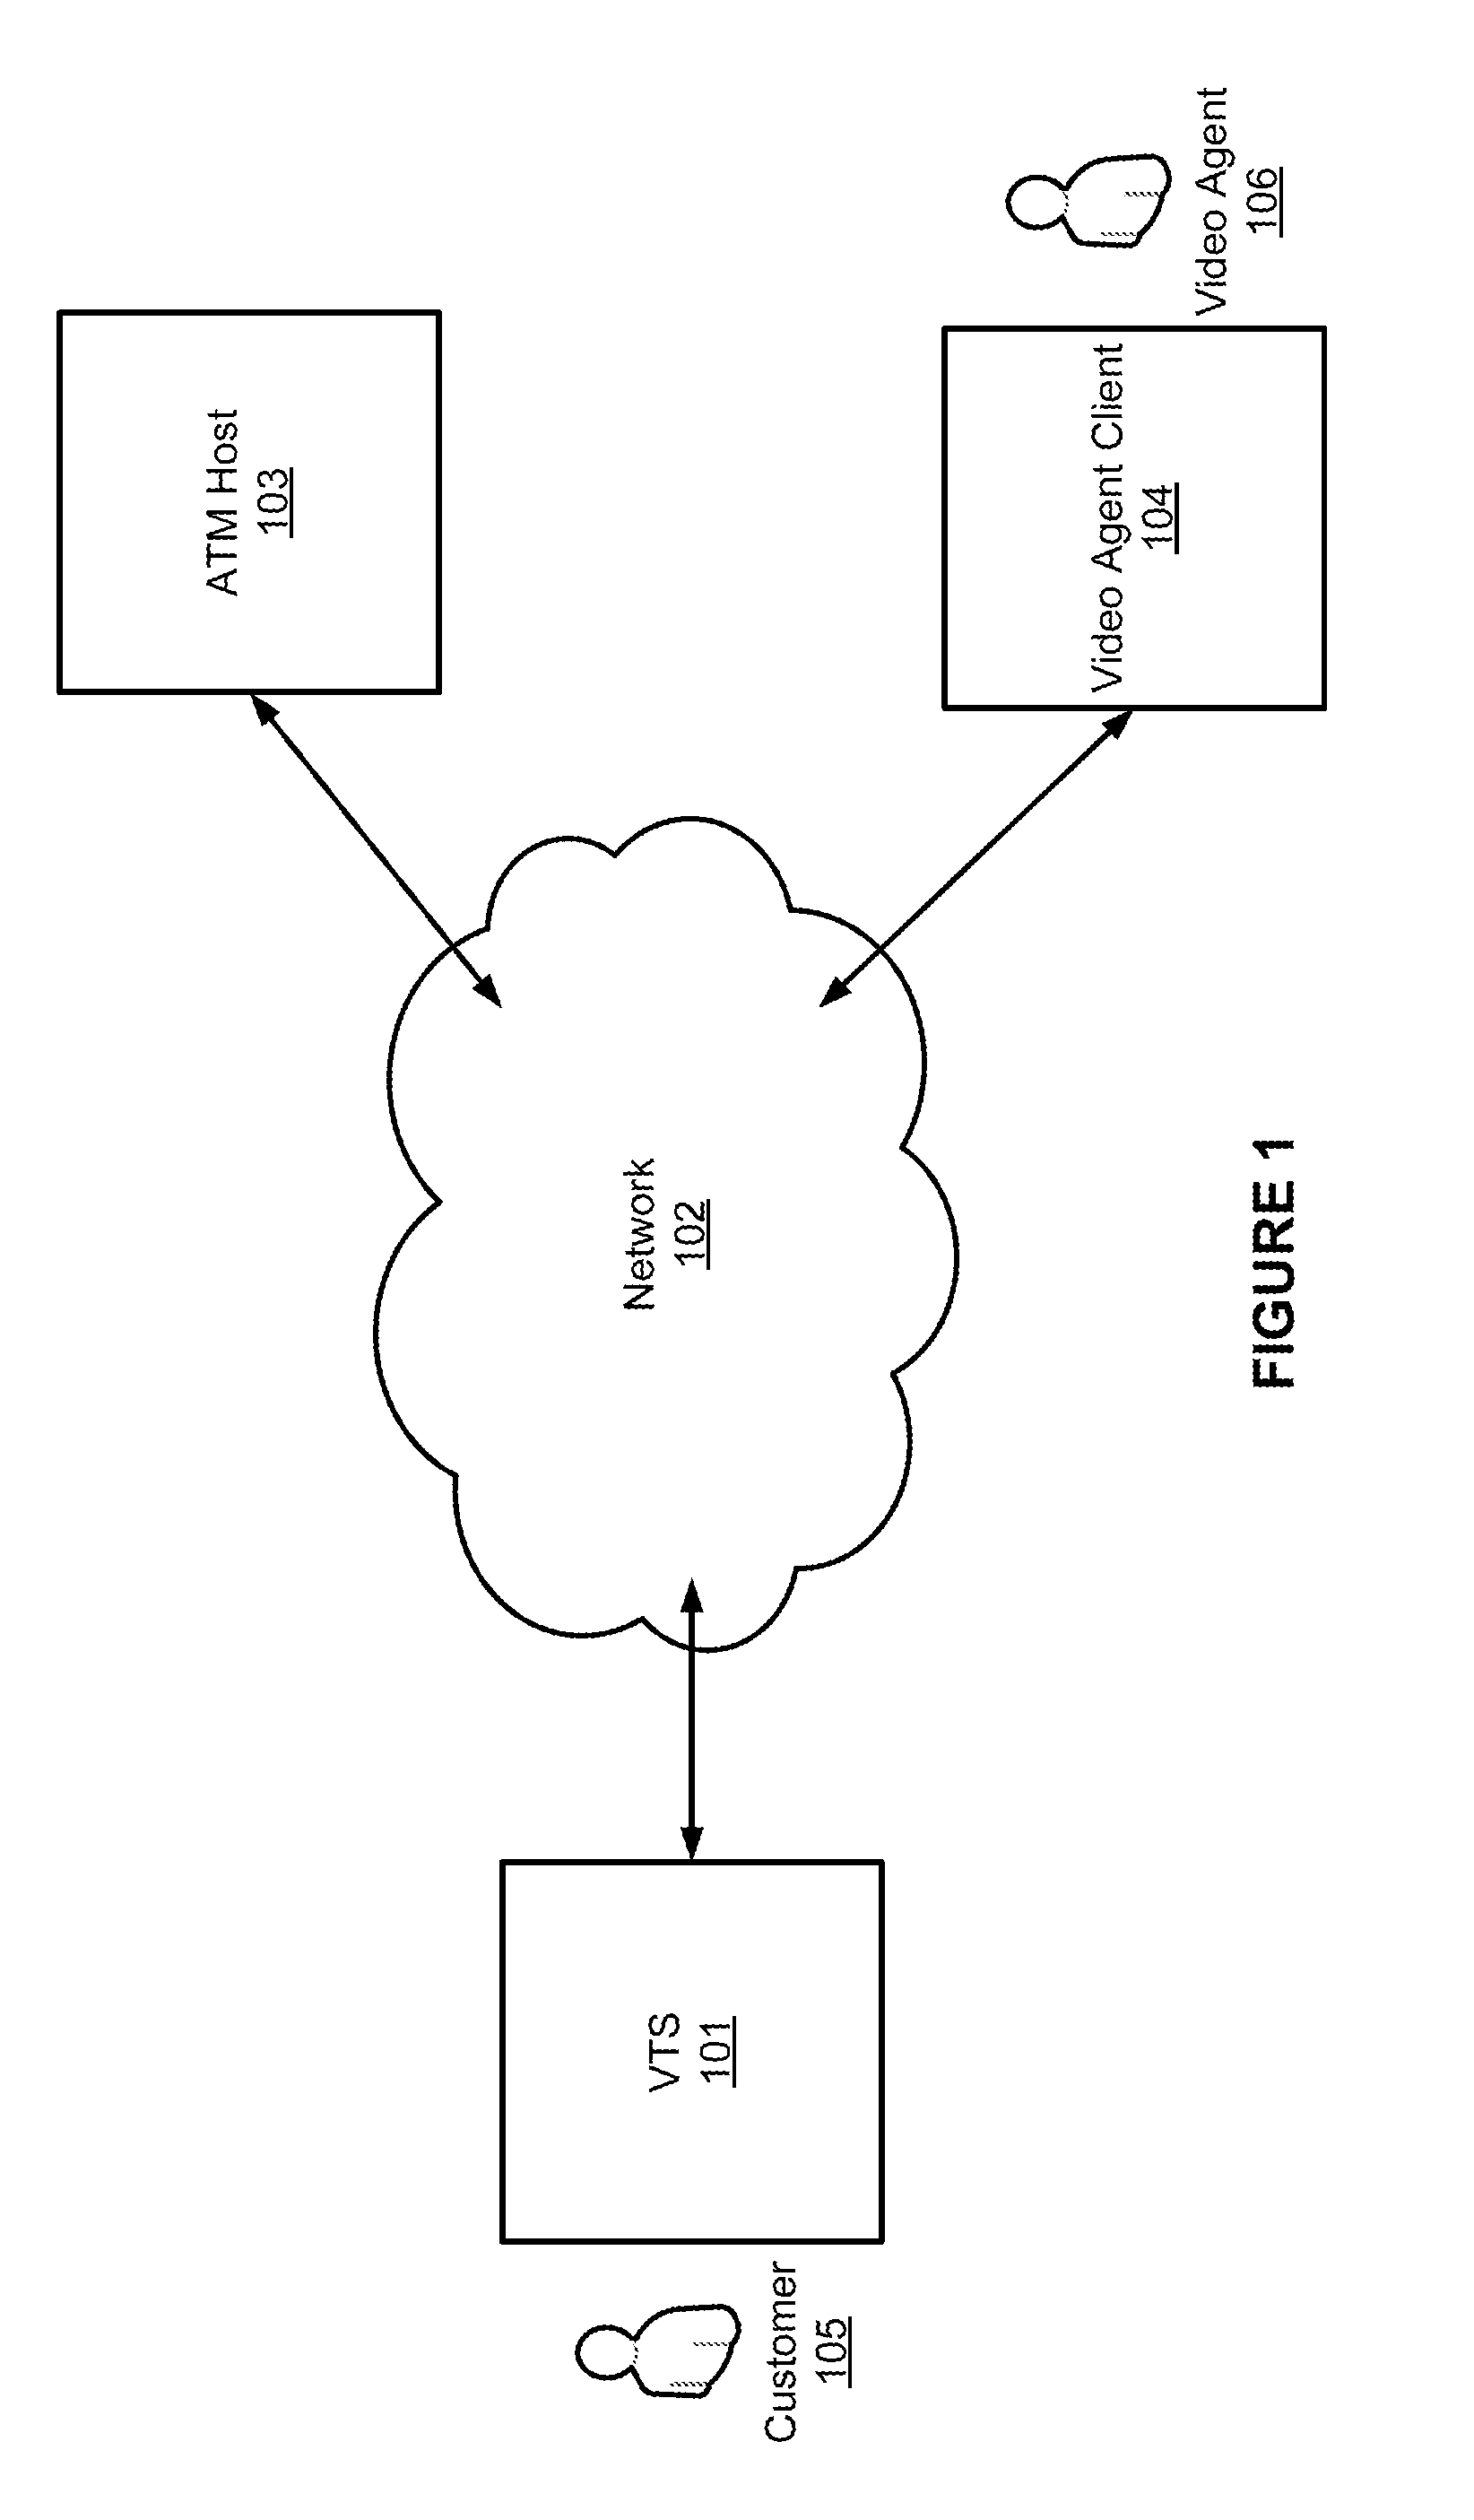 Video-assisted self-service transaction device